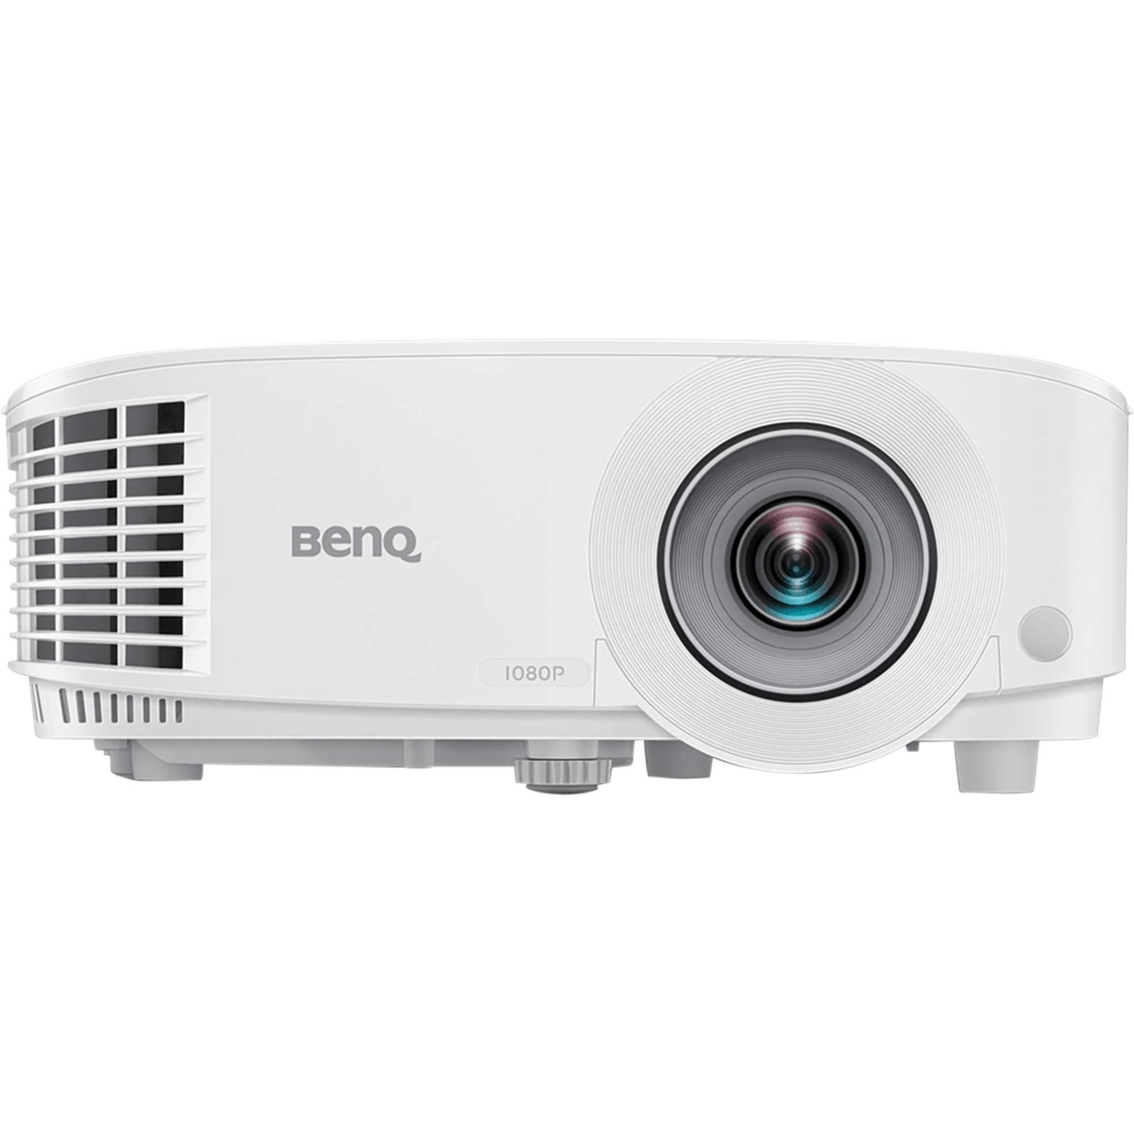 BenQ 4000 lumens Full HD Network Business Projector - Image 2 of 4